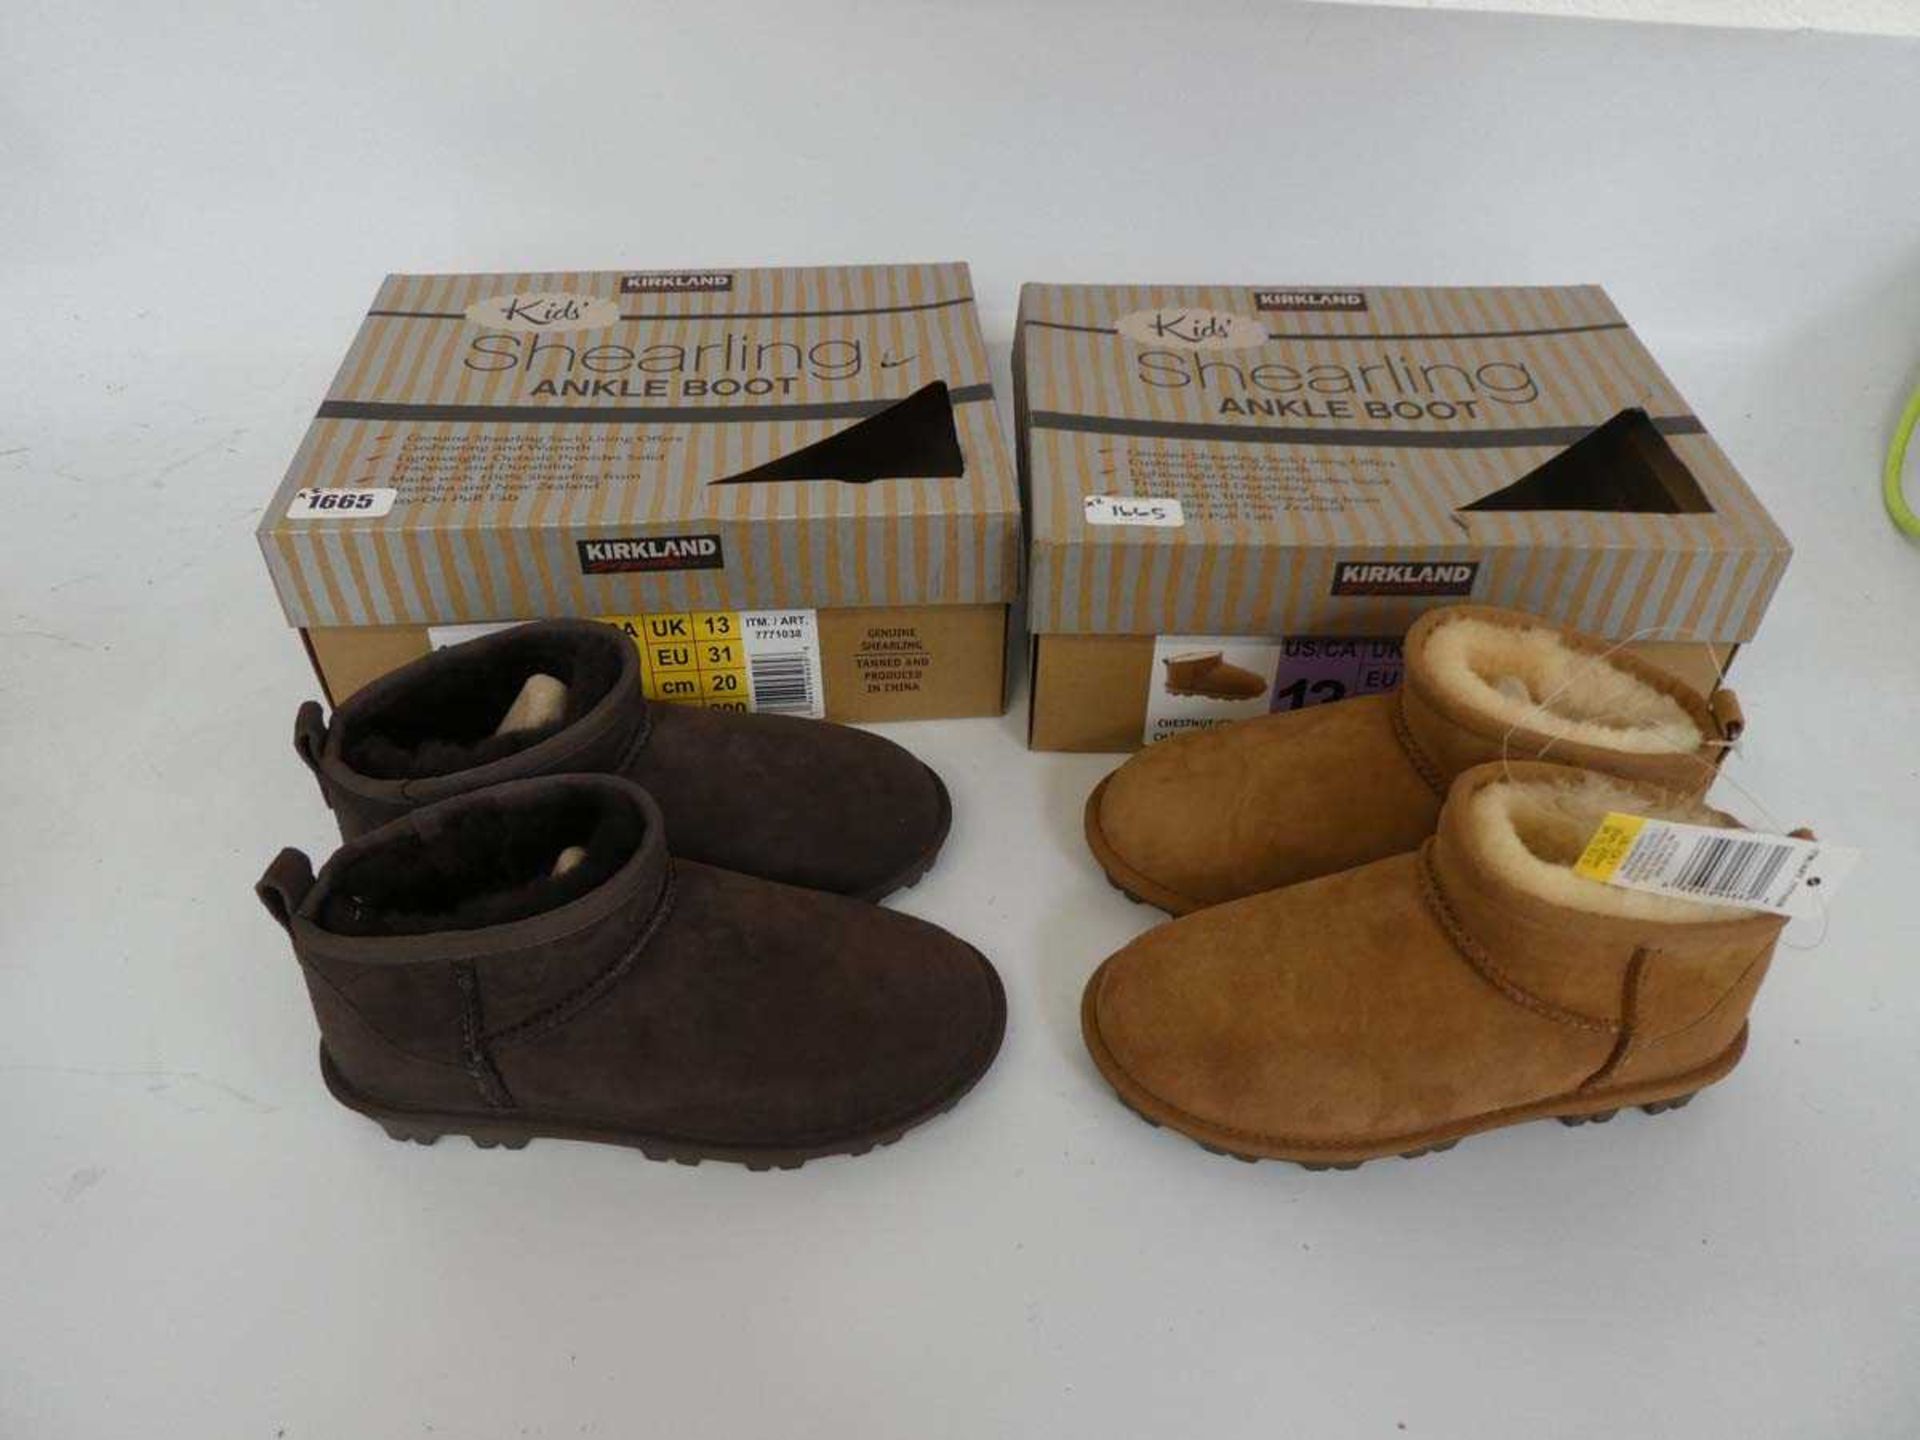 2 boxed pairs of kids kirkland shearling ankle boots - one chestnut, one brown - both size UK 13